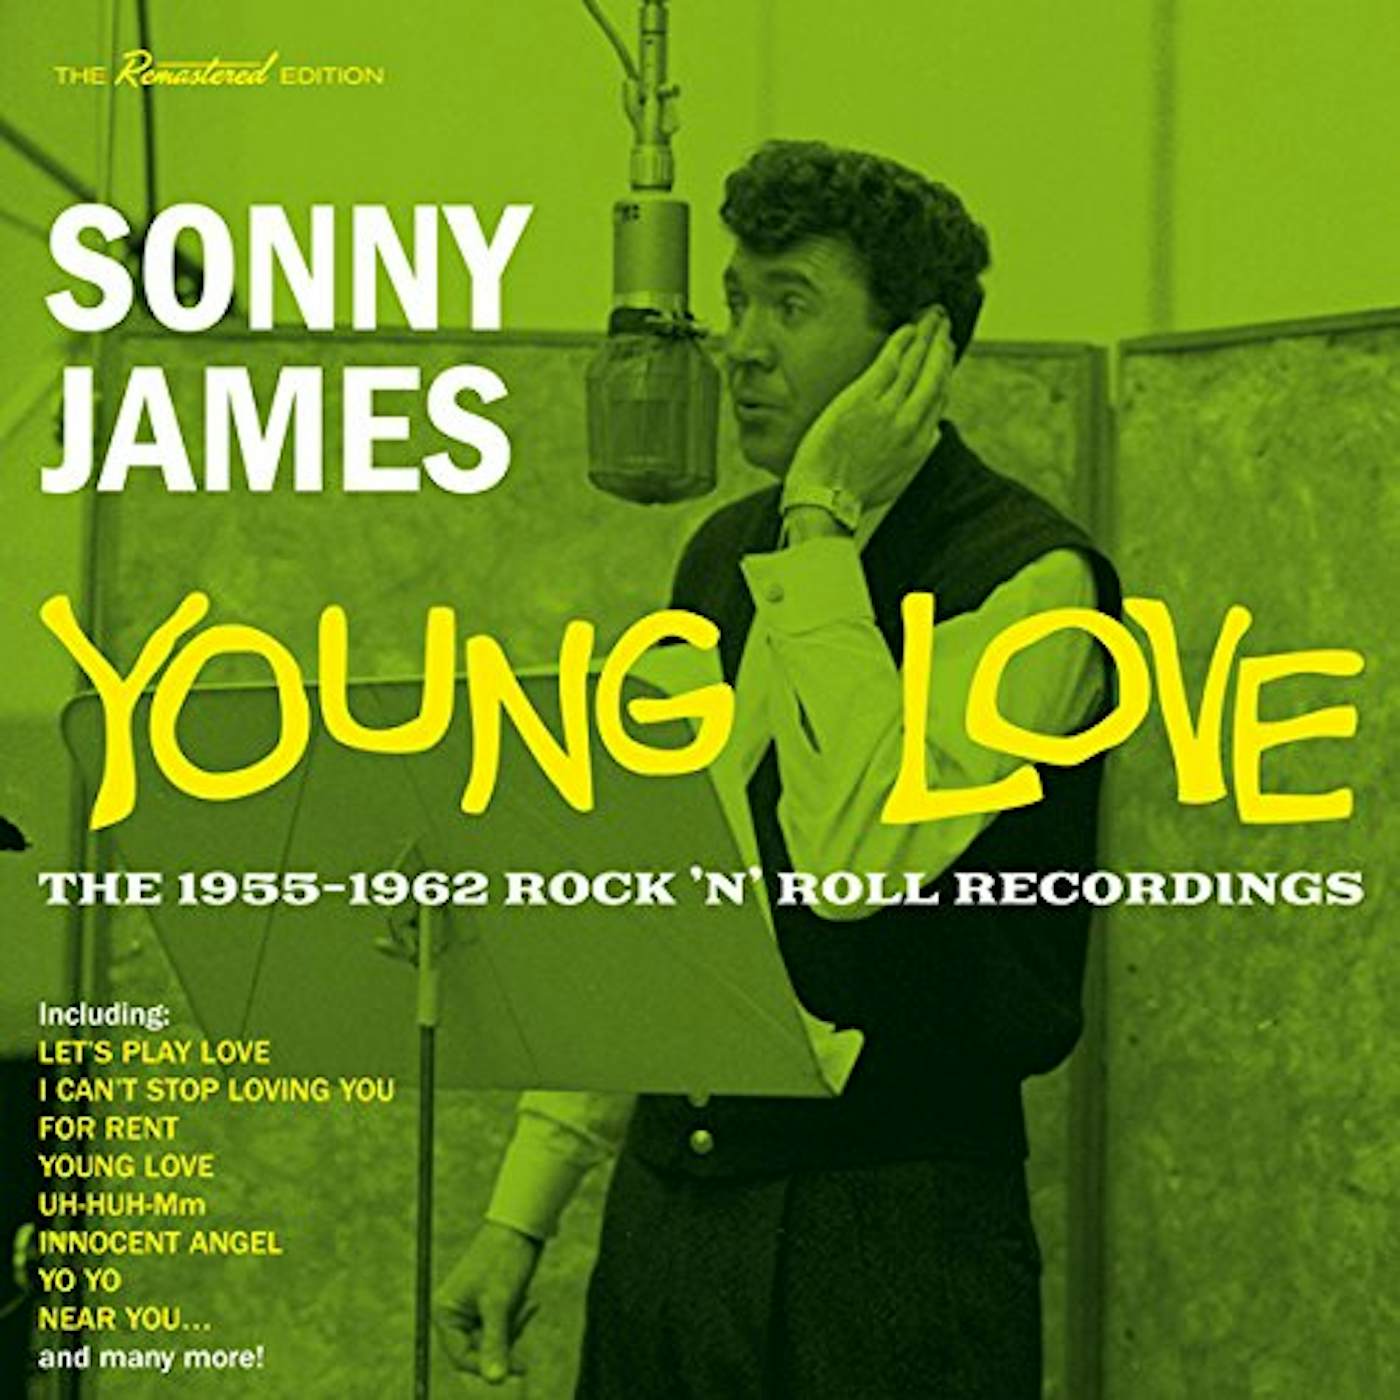 Sonny James YOUNG LOVE: 1955-1962 ROCK & ROLL RECORDINGS CD